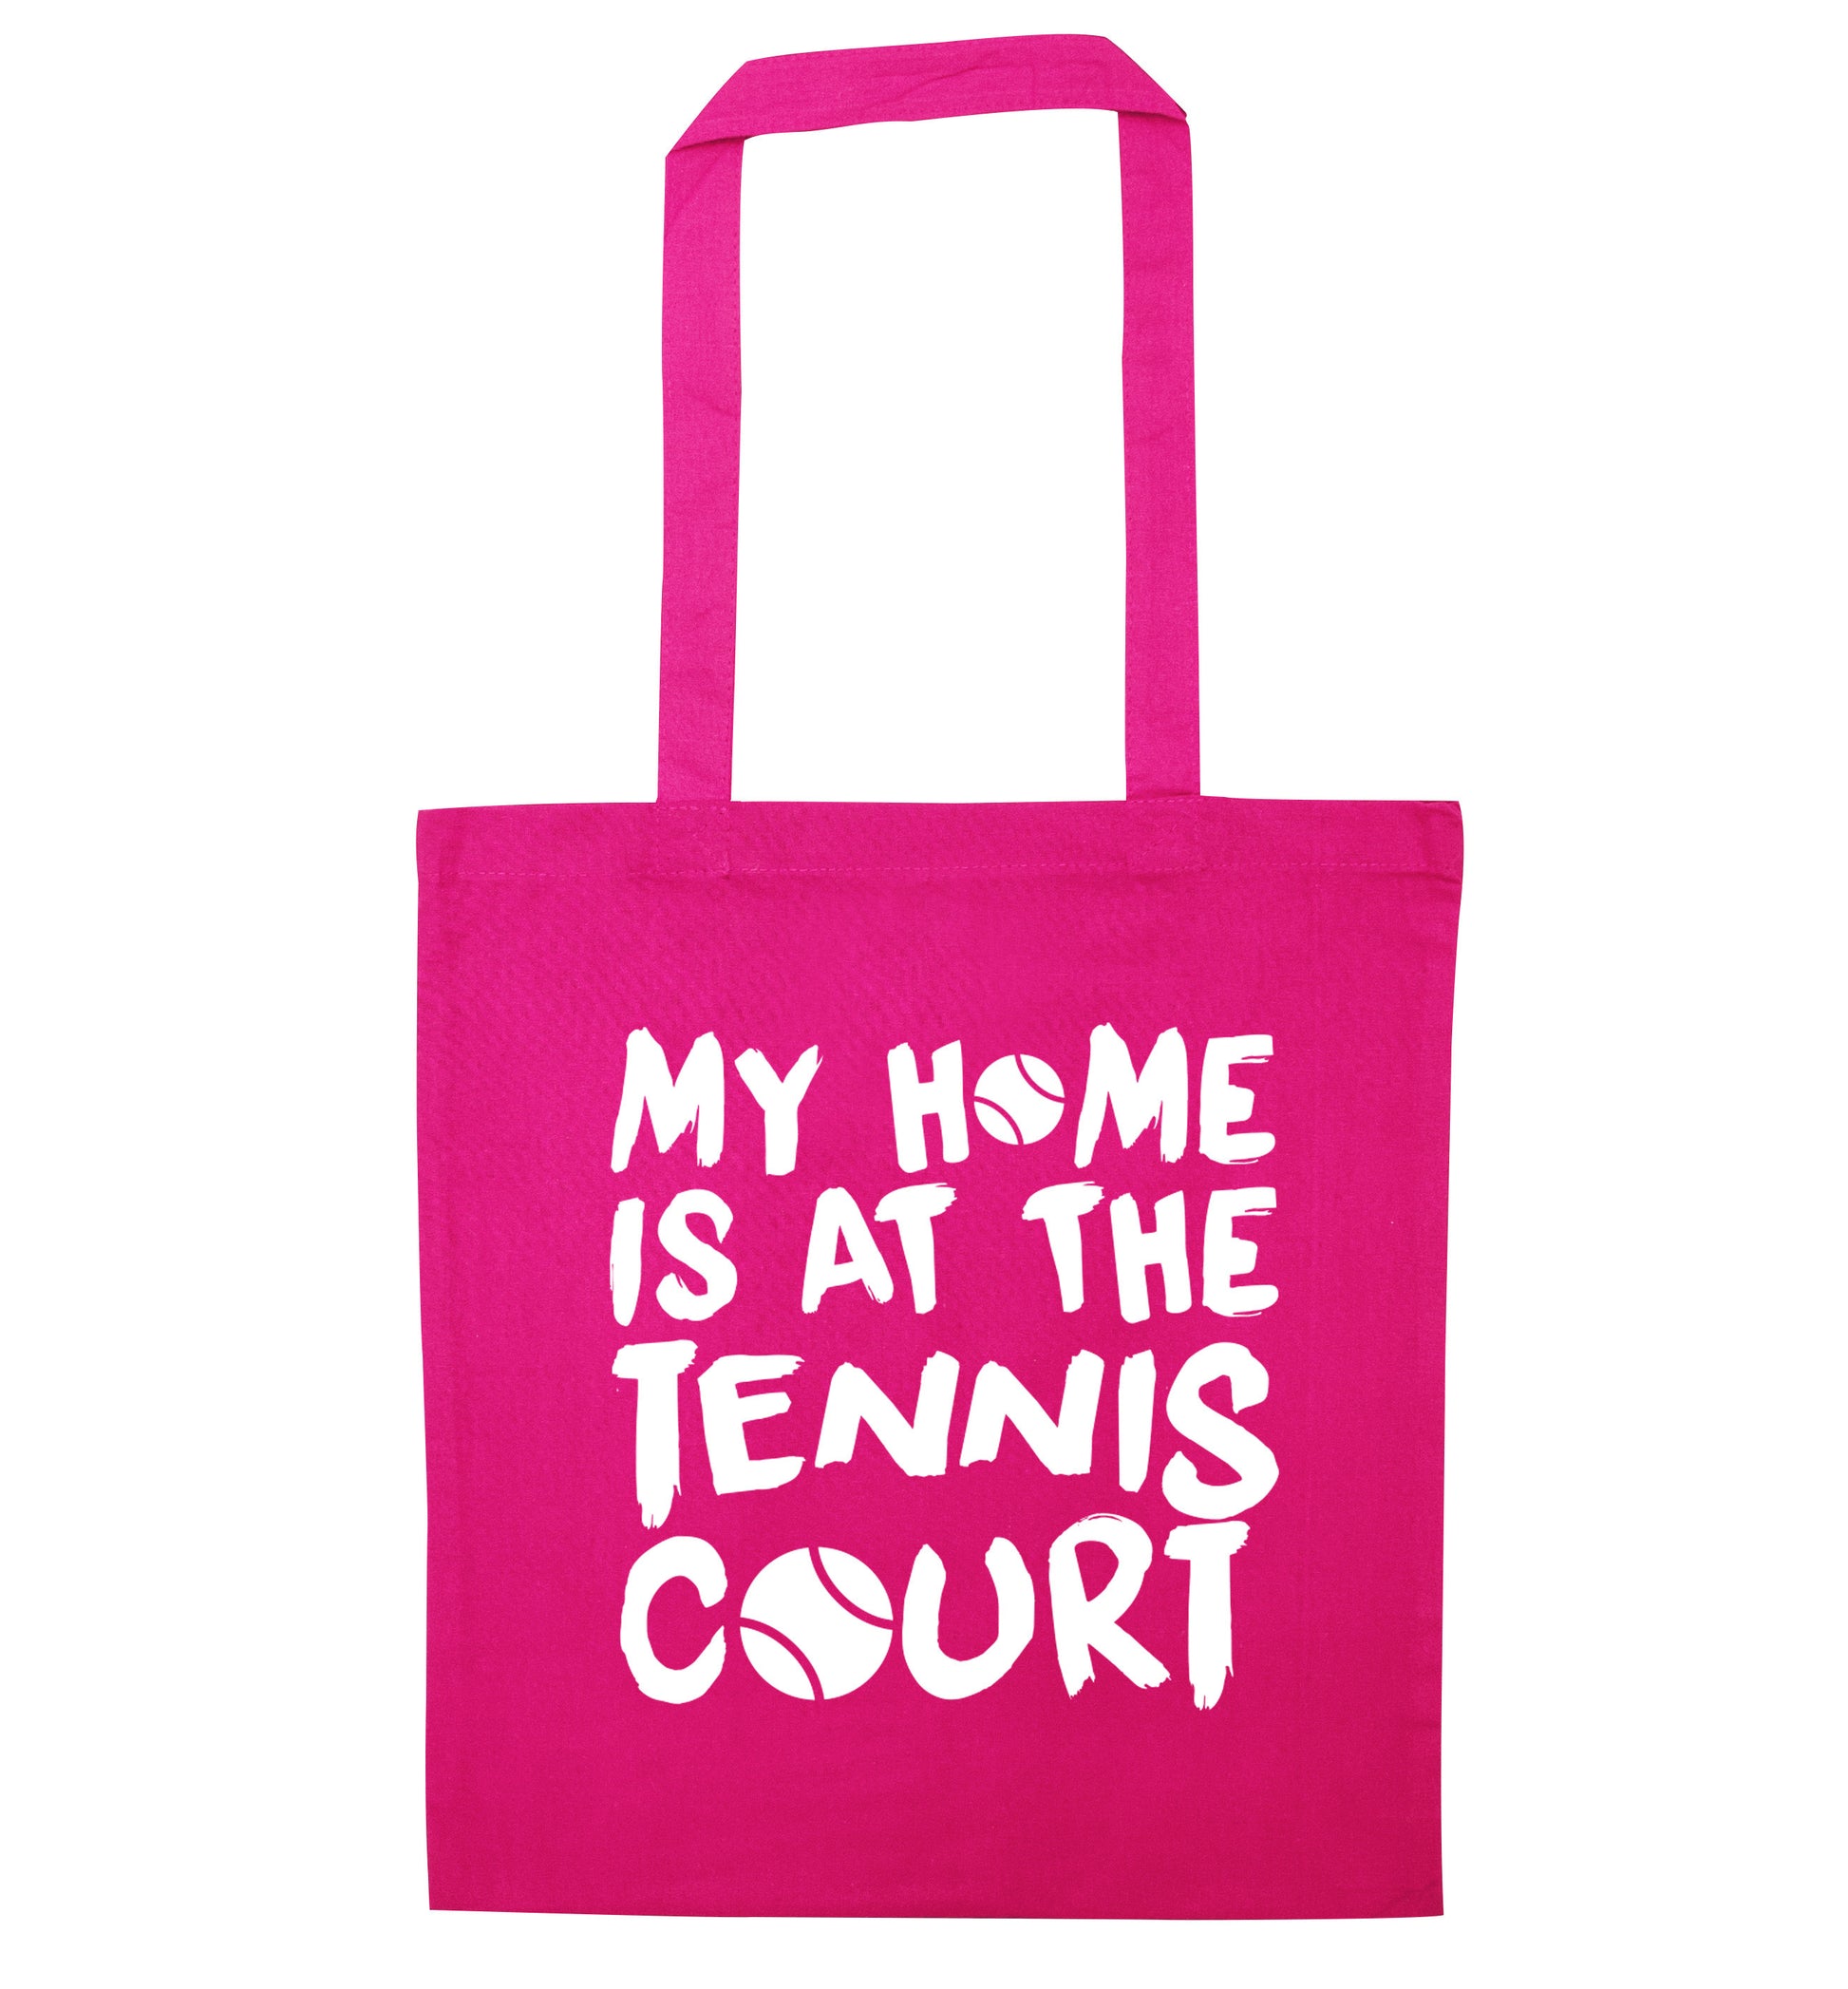 My home is at the tennis court pink tote bag